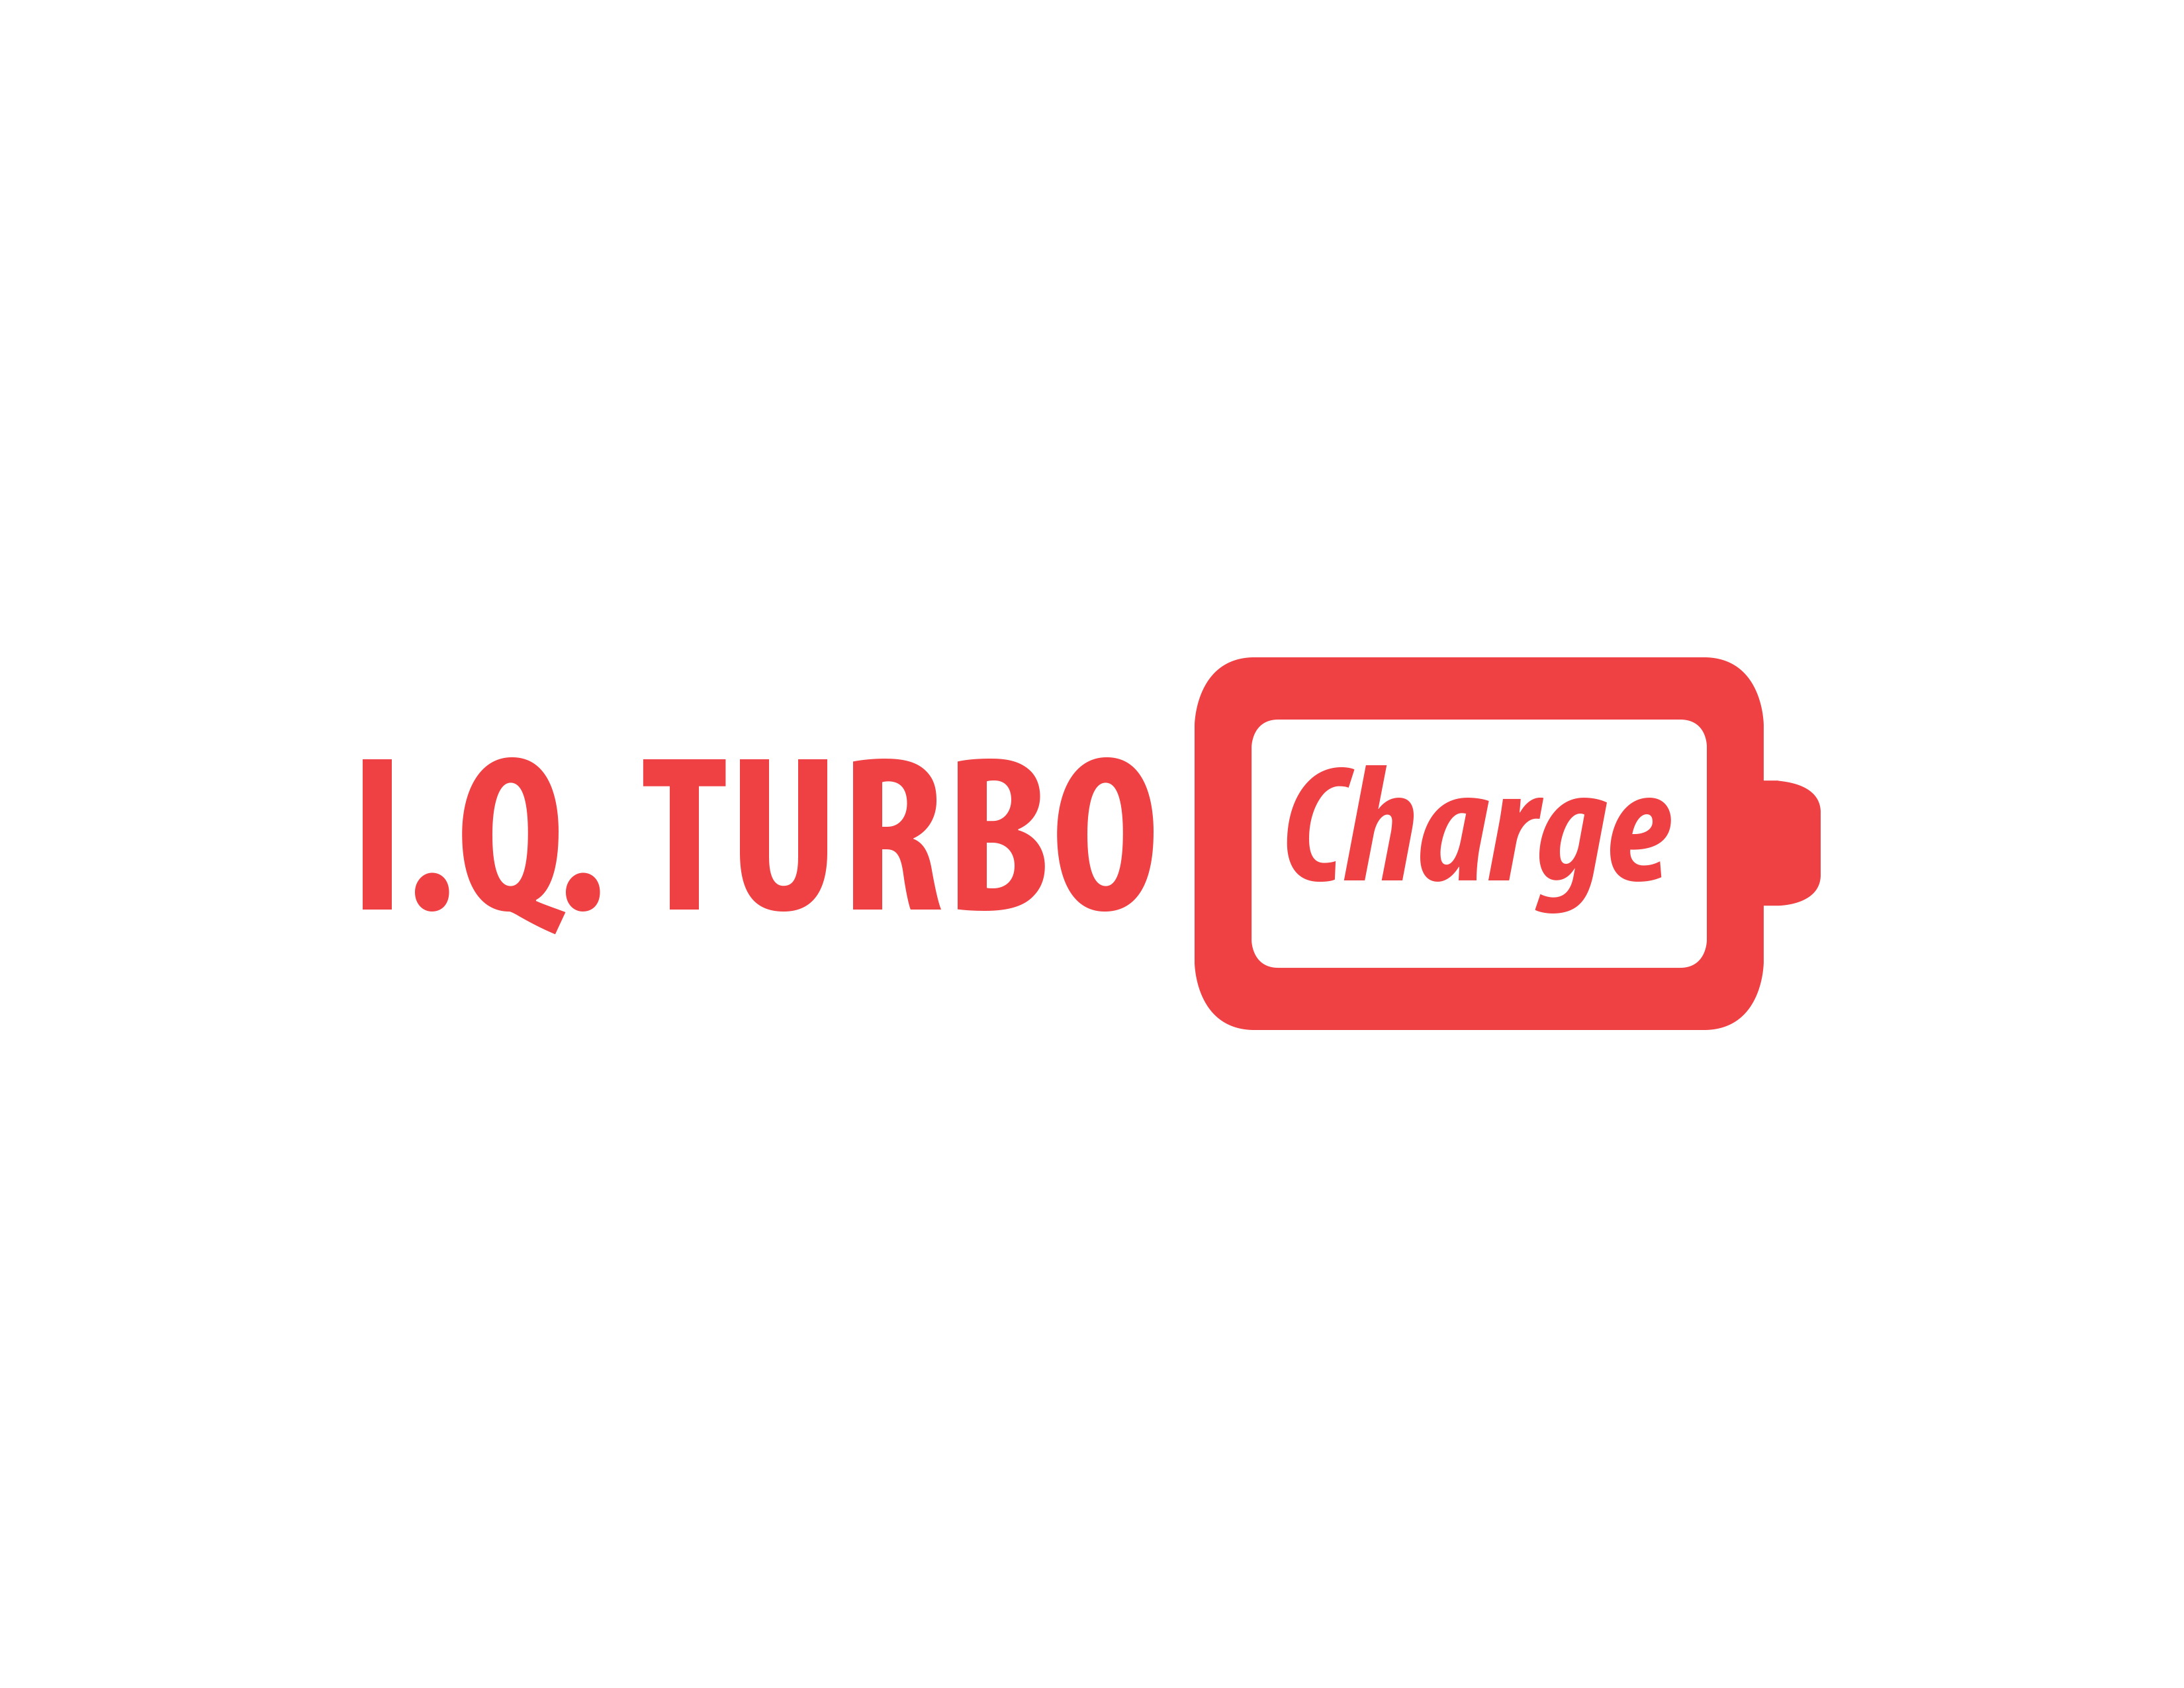 The IQ Turbo Charge will make sure these devices last as long as possible.